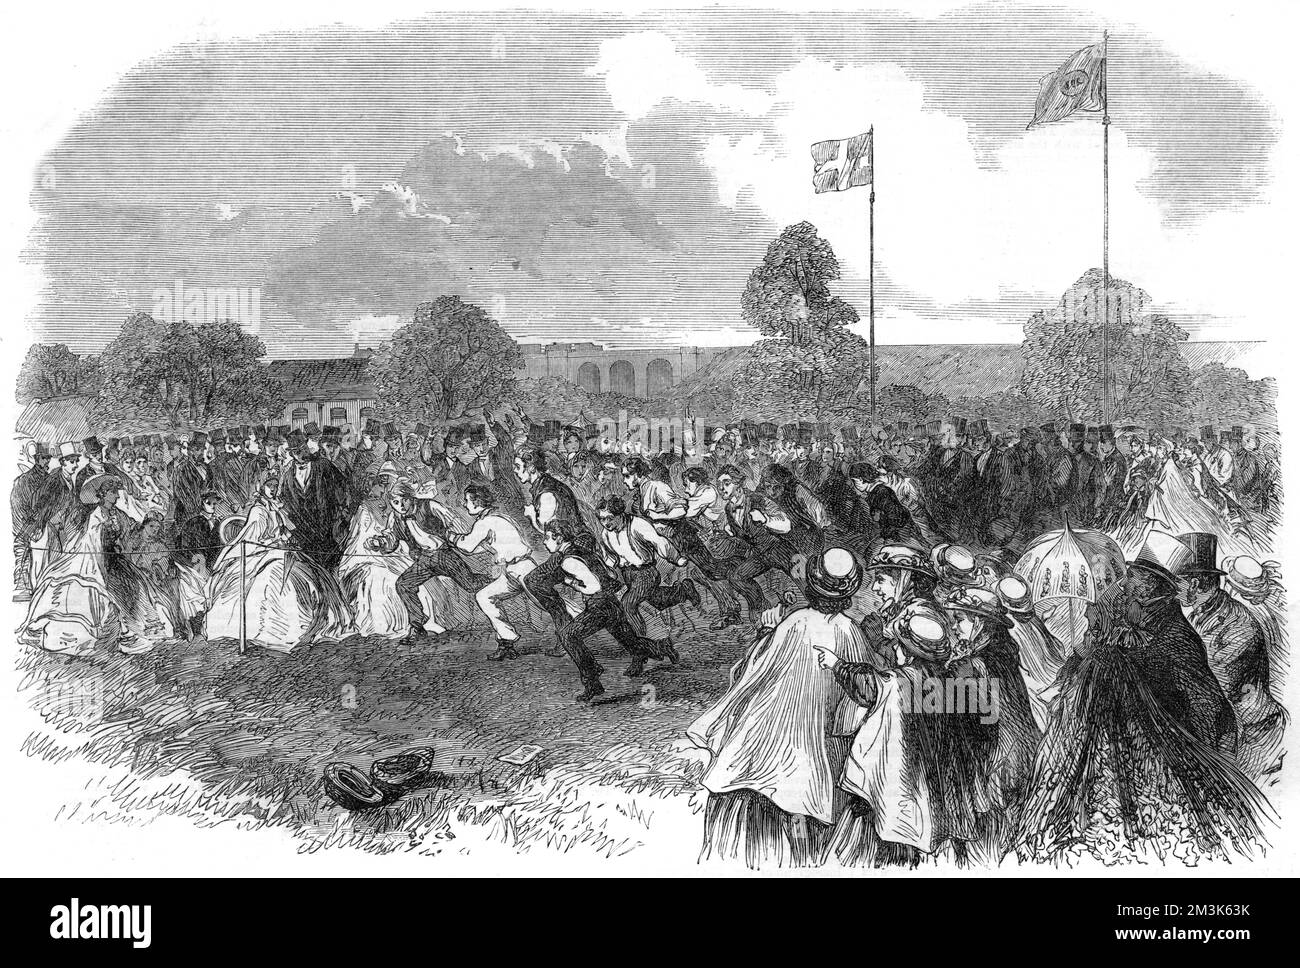 One of the running races held for the patients of the 'Earlswood Asylum for Idiots', near Redhill.  A large crowd of spectators, in Victorian dress, line the running track as the competitors sprint past.  1864 Stock Photo